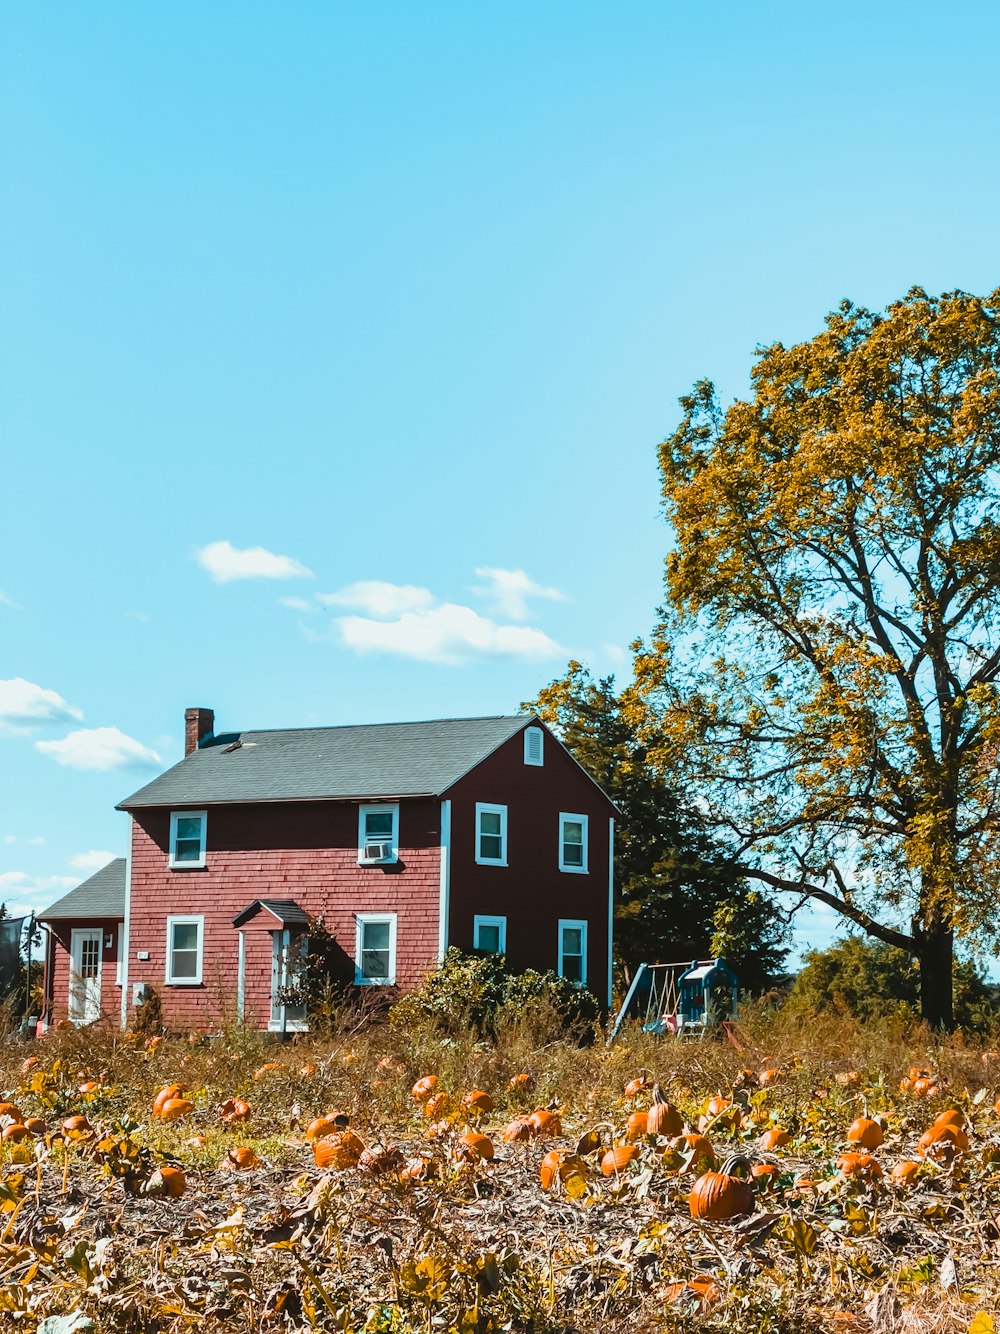 a red house surrounded by pumpkins in a field